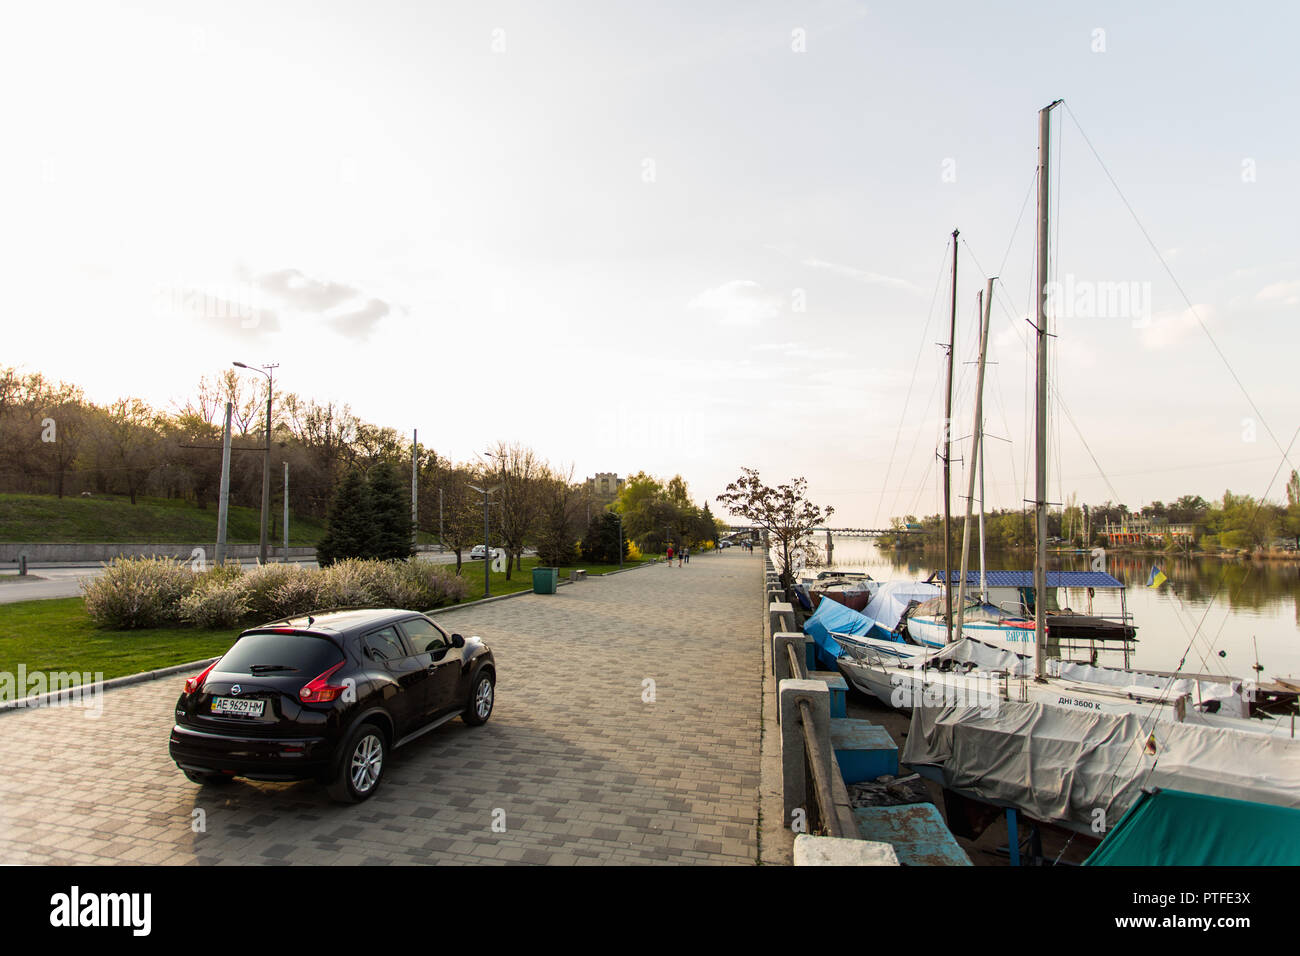 DNIPRO, UKRAINE - APRIL 12, 2016: NISSAN JUKE IN THE SPRING CITY NEAR THE BERTH AT SUNSET Stock Photo